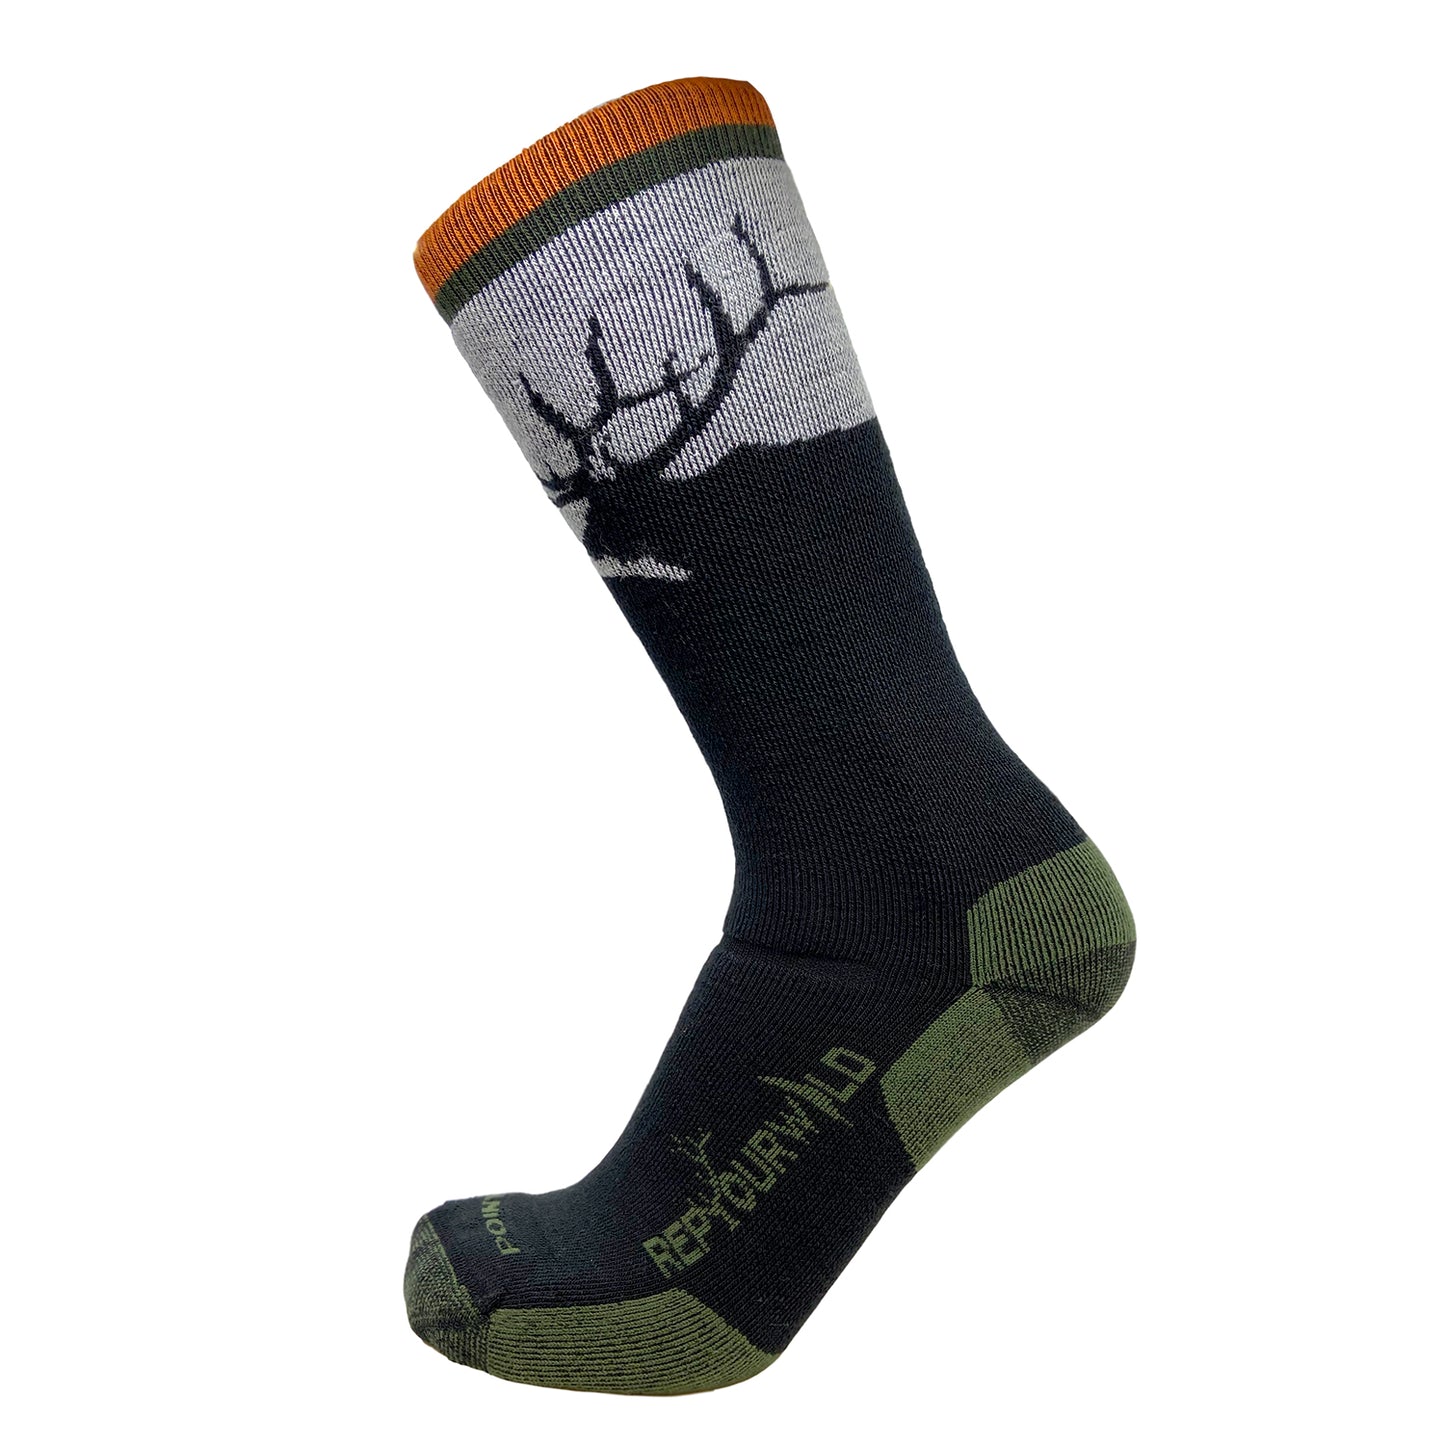 A single sock has an elk head and antlers on the main area and says repyourwild on the foot